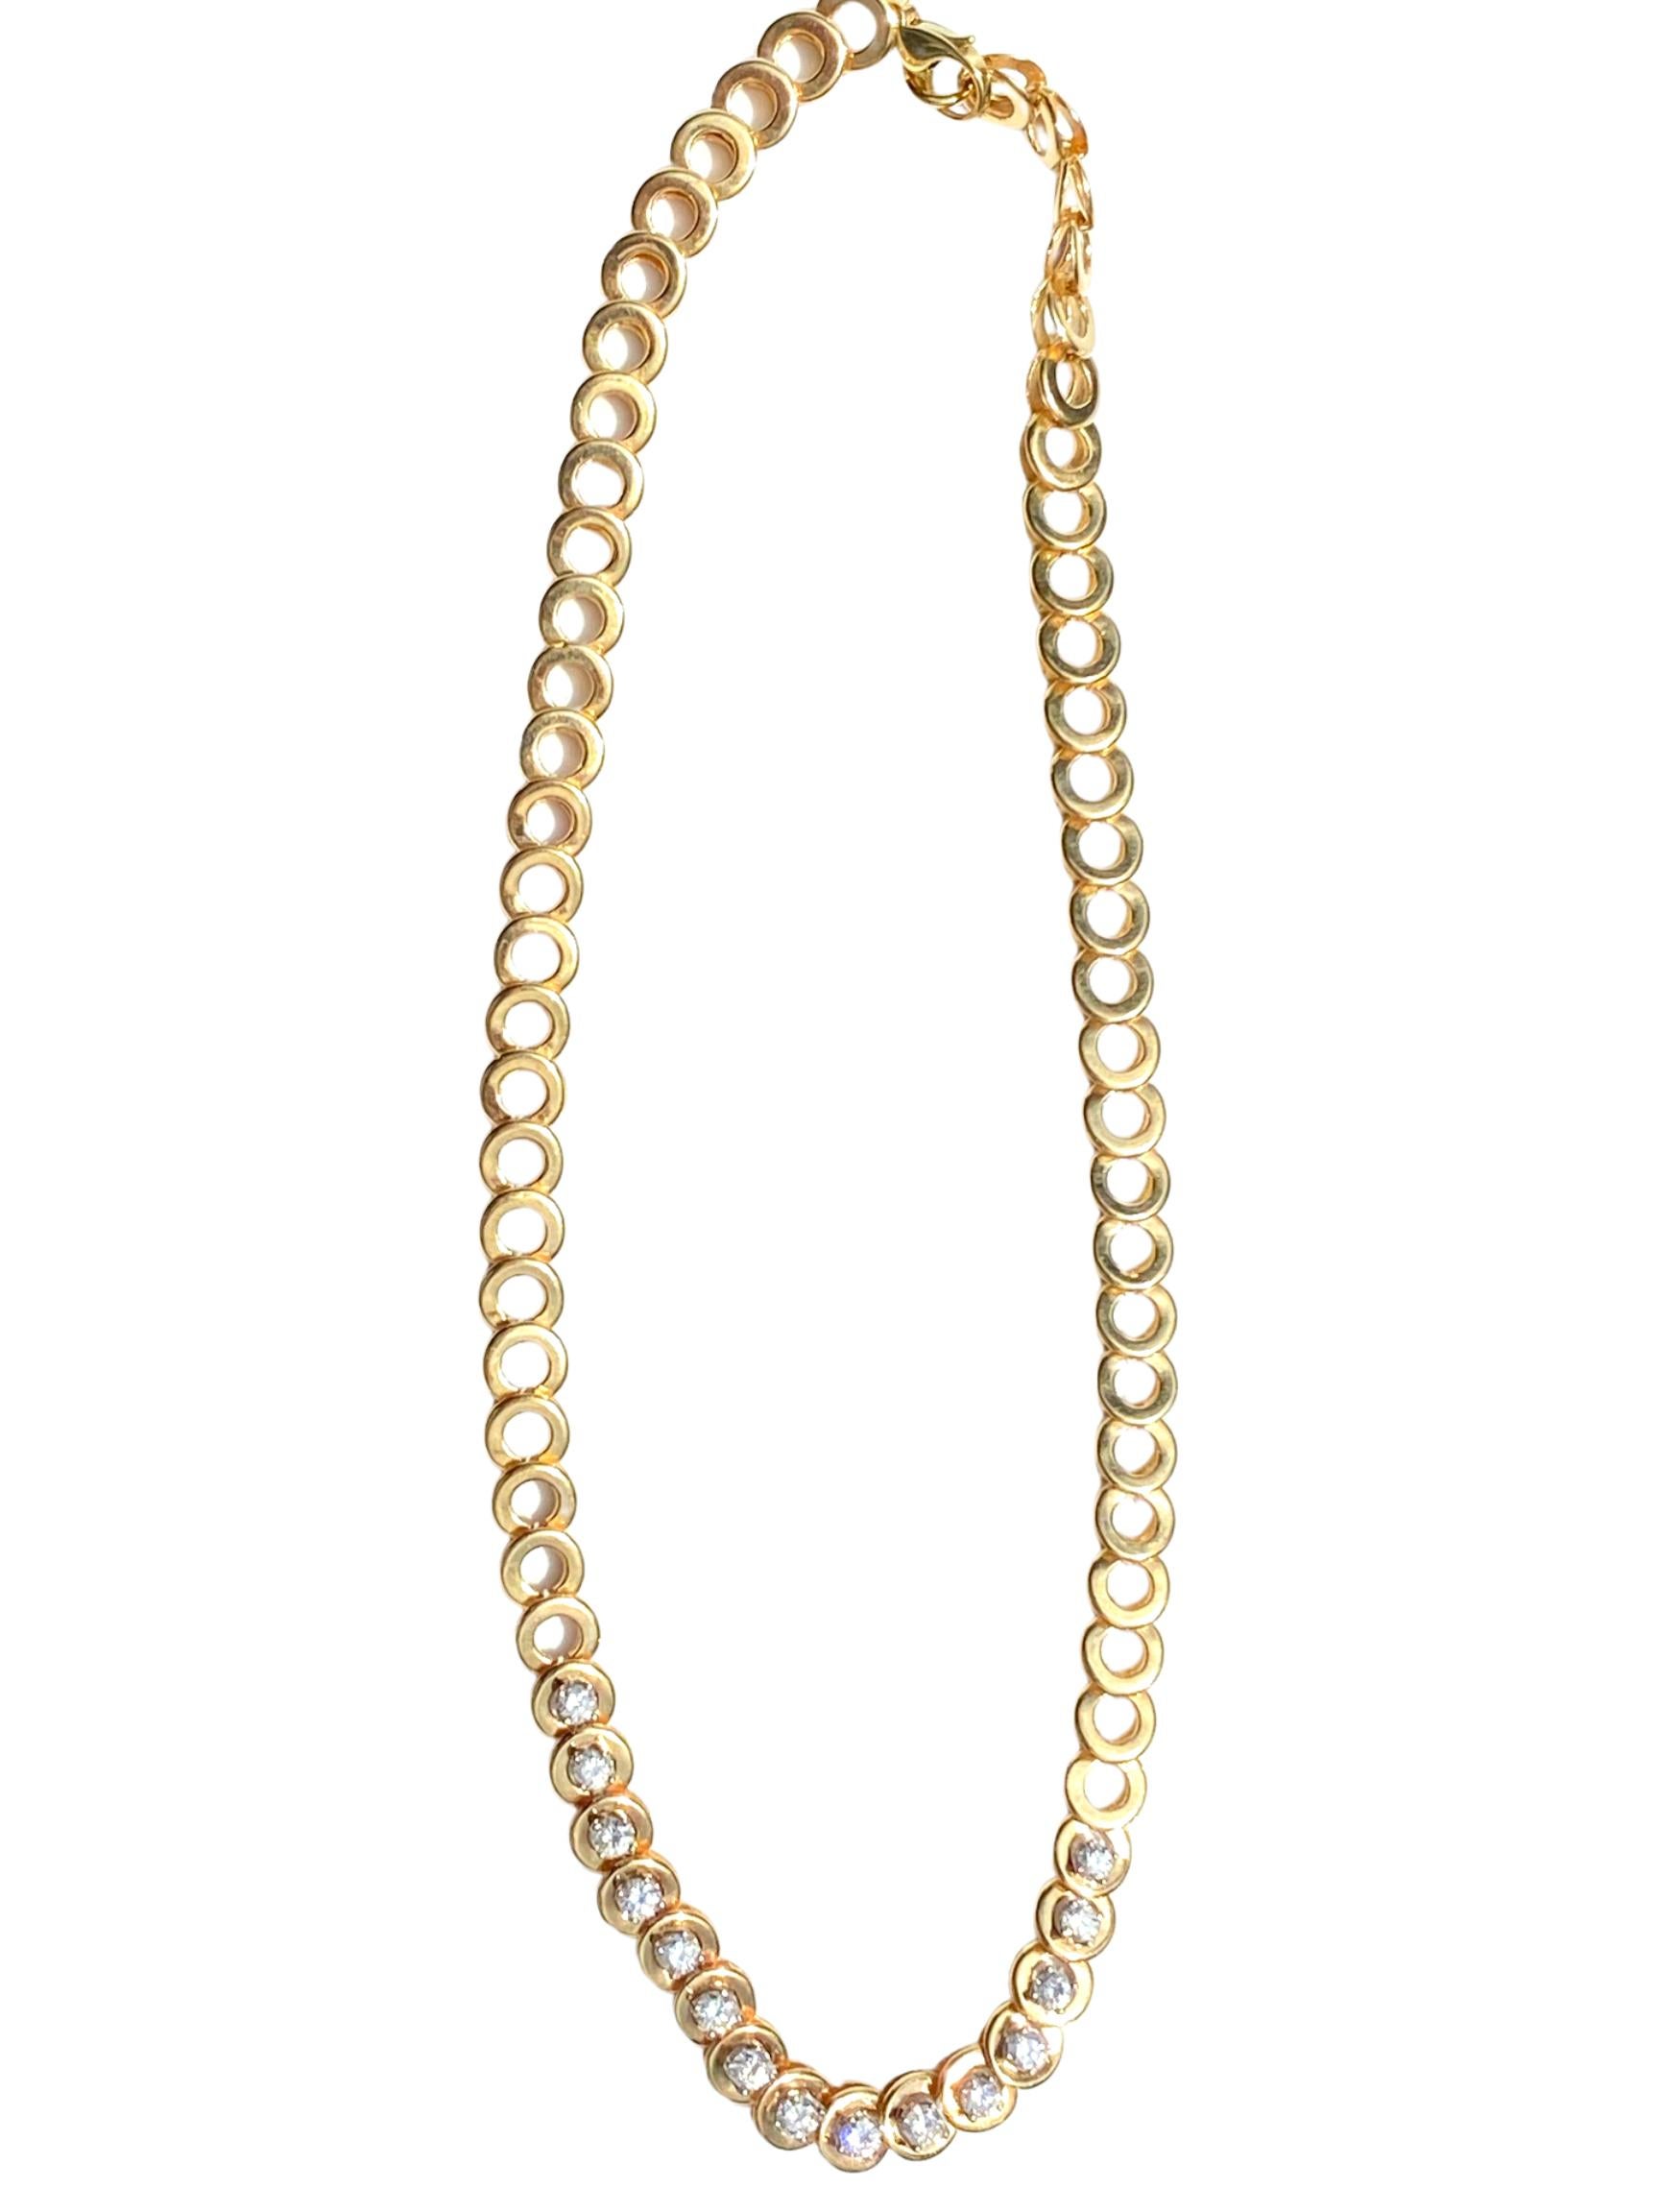 Modern 4.00 Carat Round-Brilliant Cut Diamond Chain 14k Yellow Gold Necklace For Sale